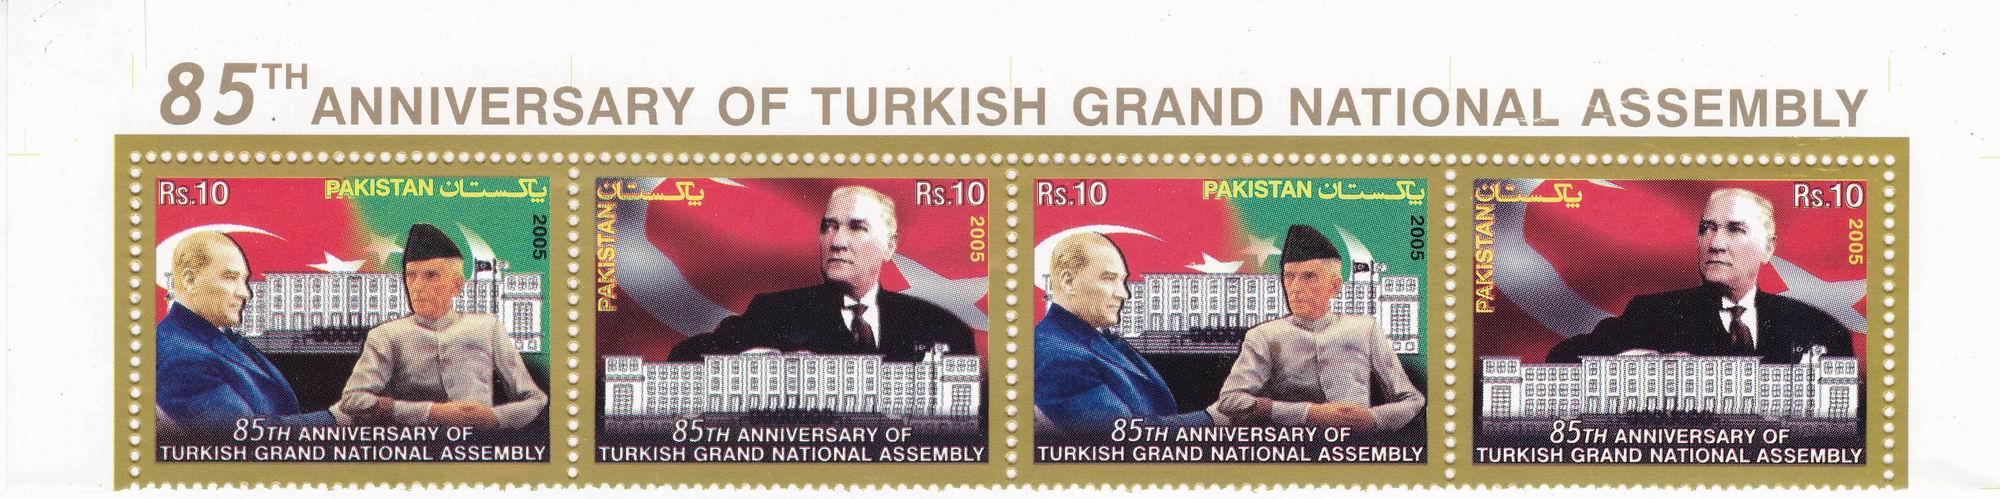 Pakistan Stamps 2000 National College of Arts Lahore - Click Image to Close